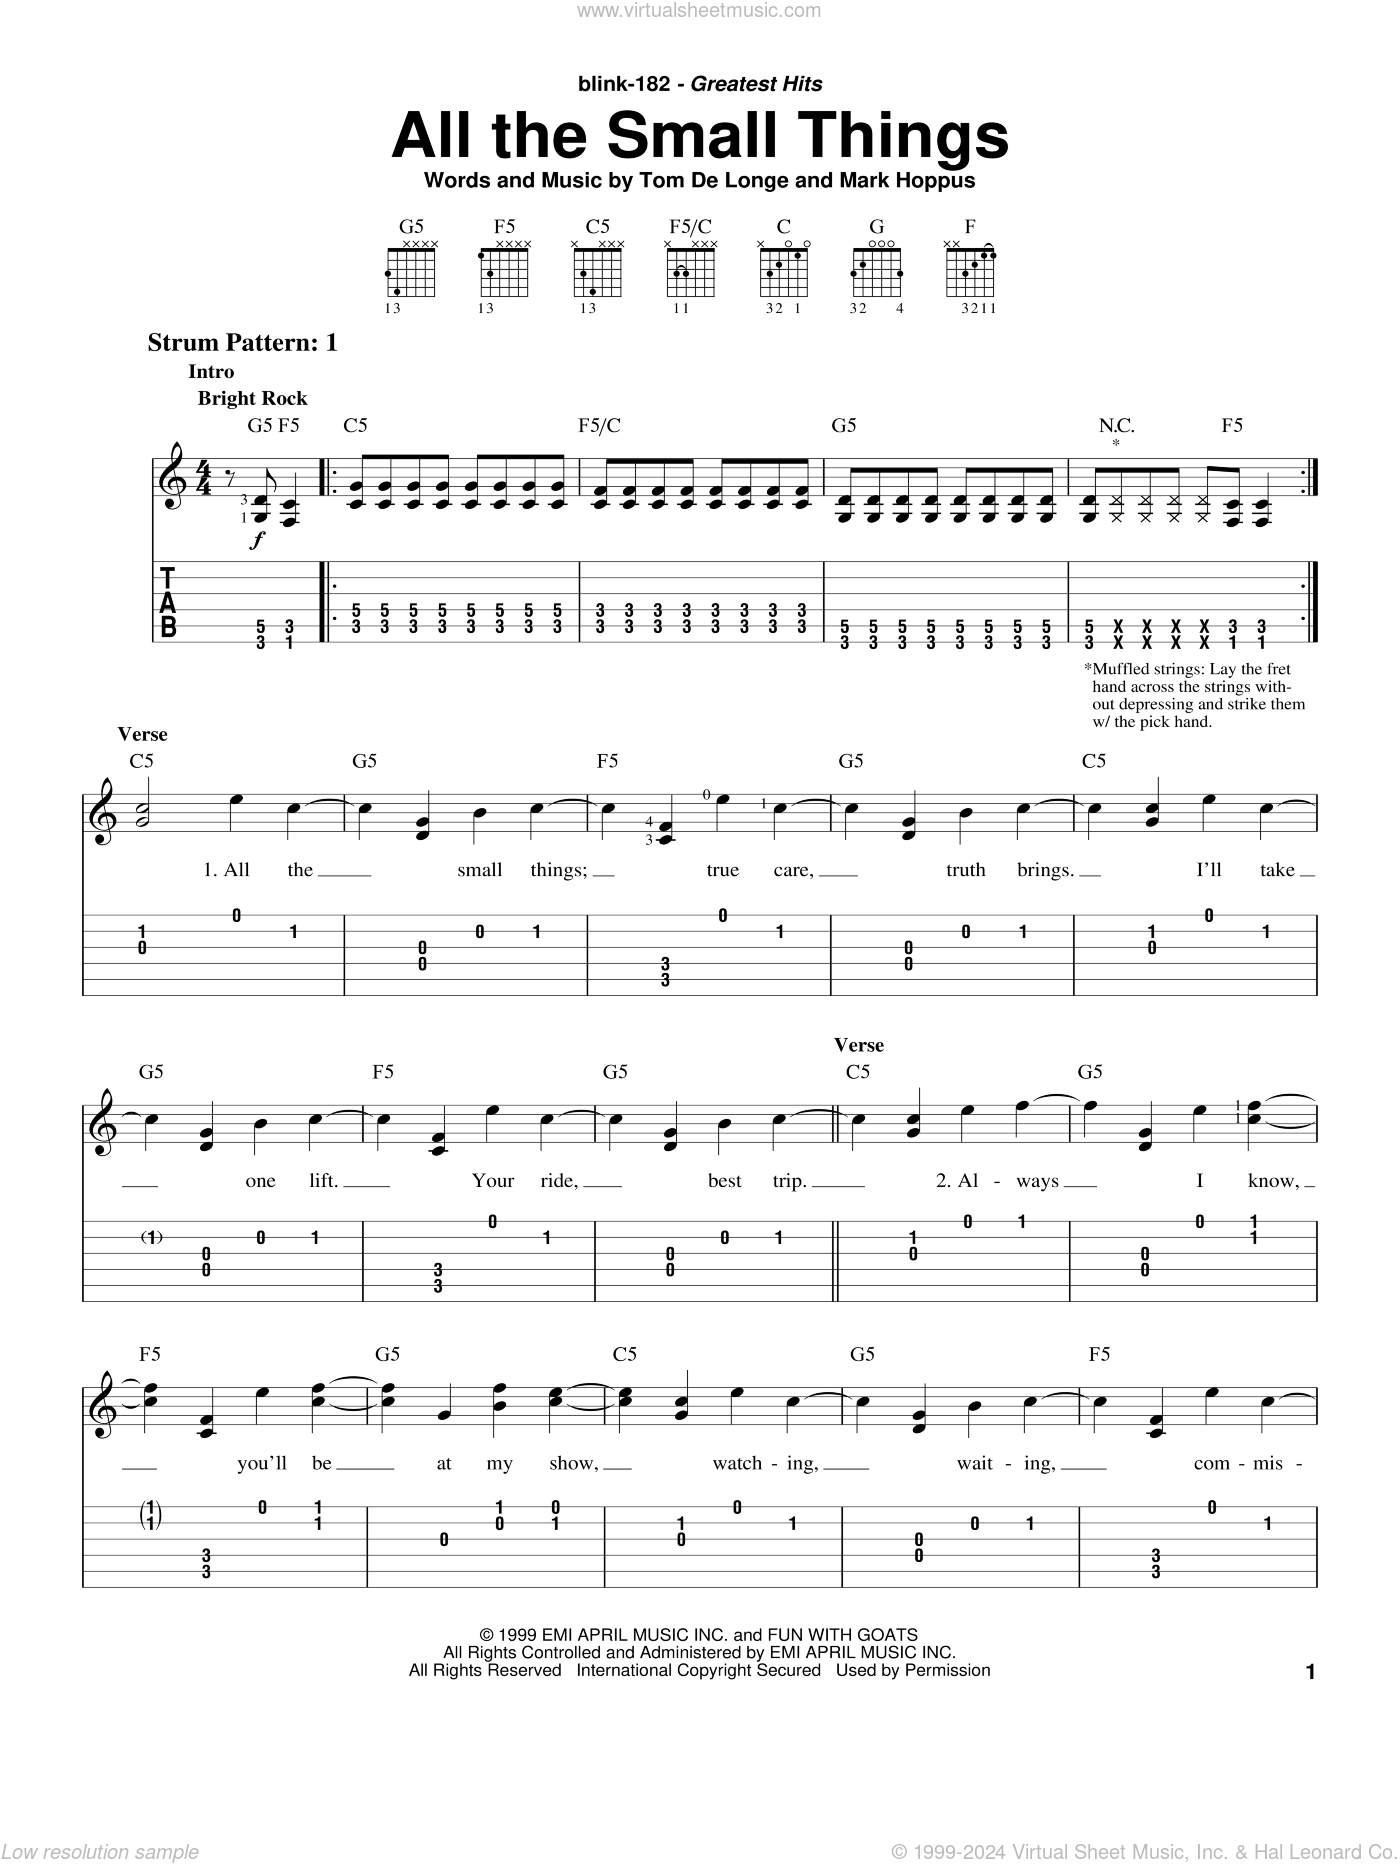 I Miss You" Sheet Music by blink-182 for Guitar Tab/Vocal - Sheet  Music Now